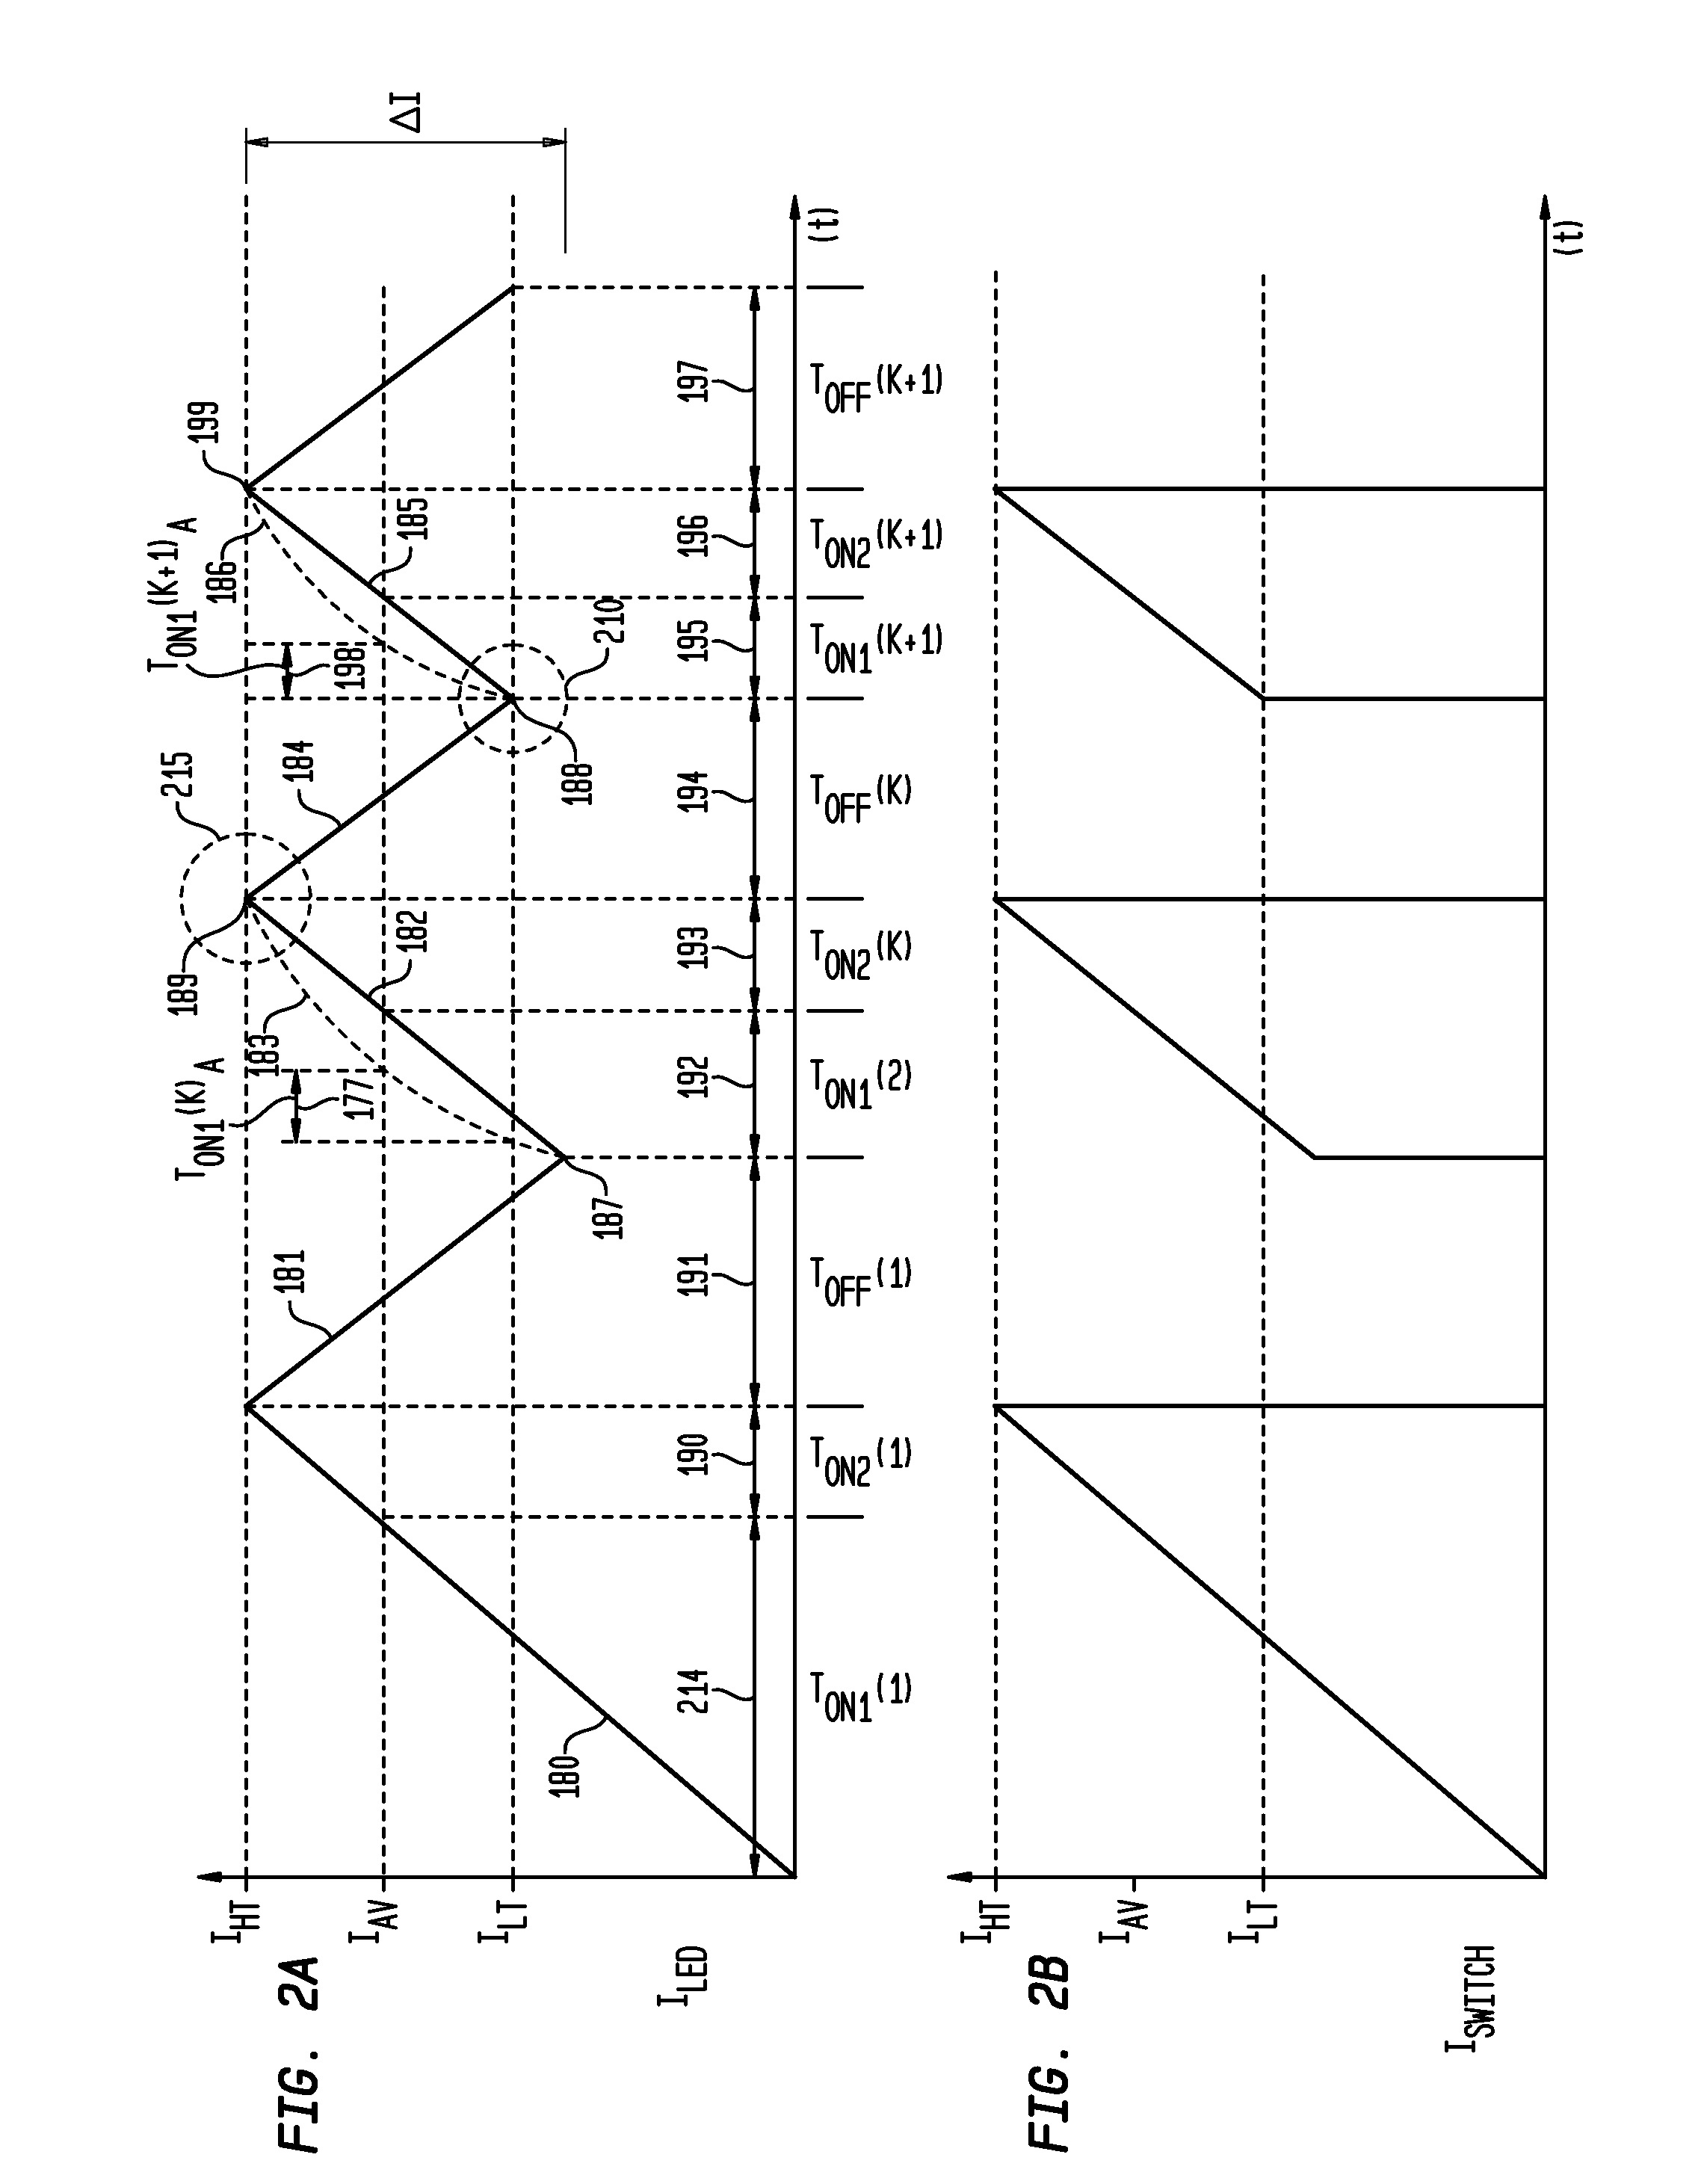 Digital Driver Apparatus, Method and System for Solid State Lighting